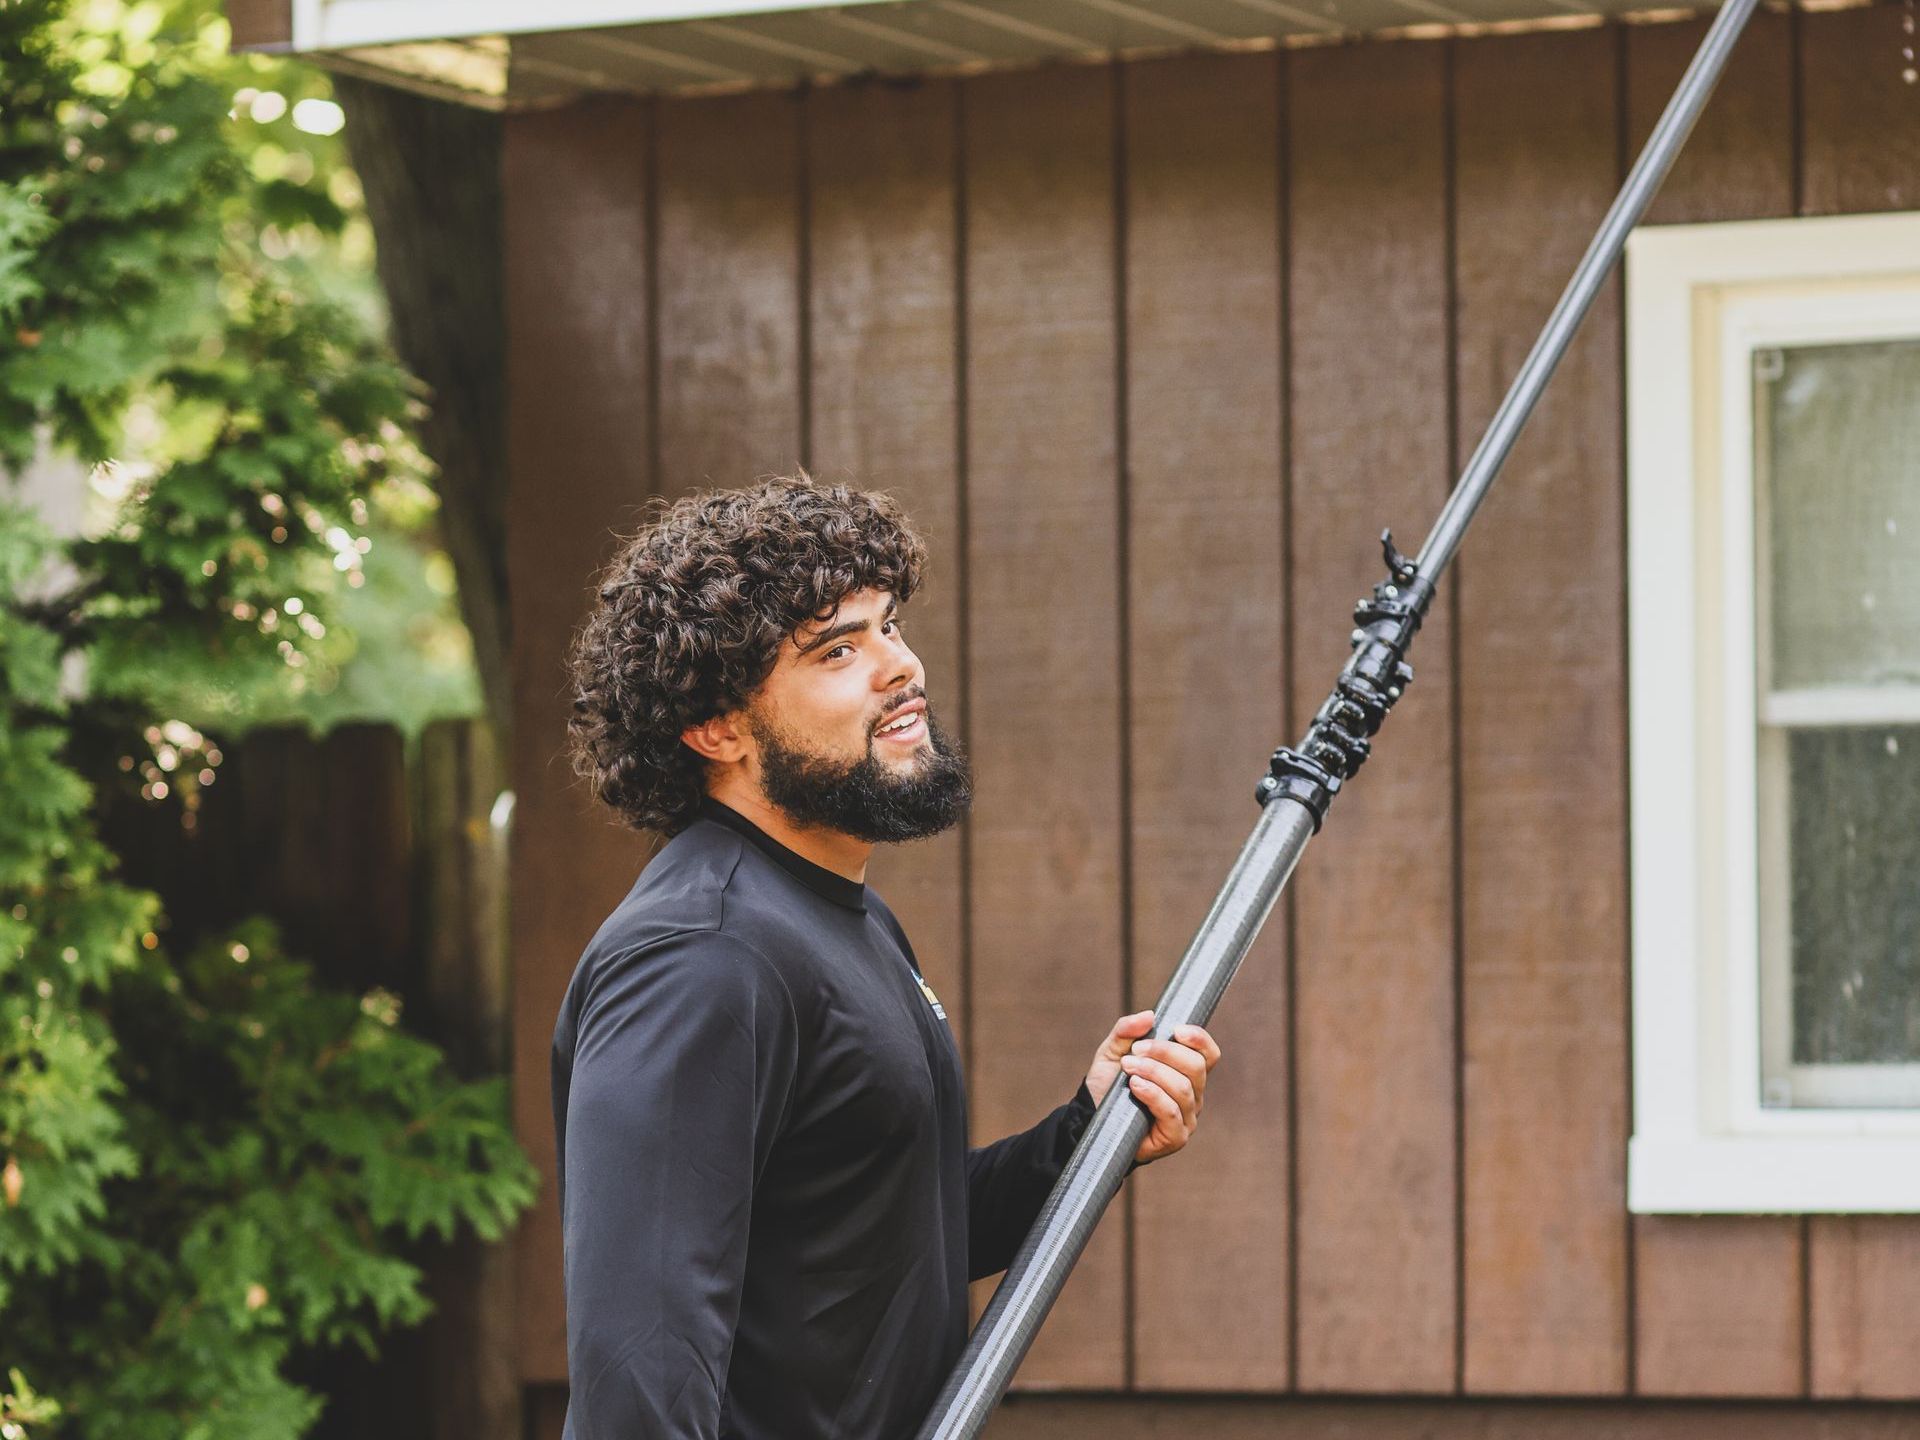 a man with a beard is holding a pole in front of a house